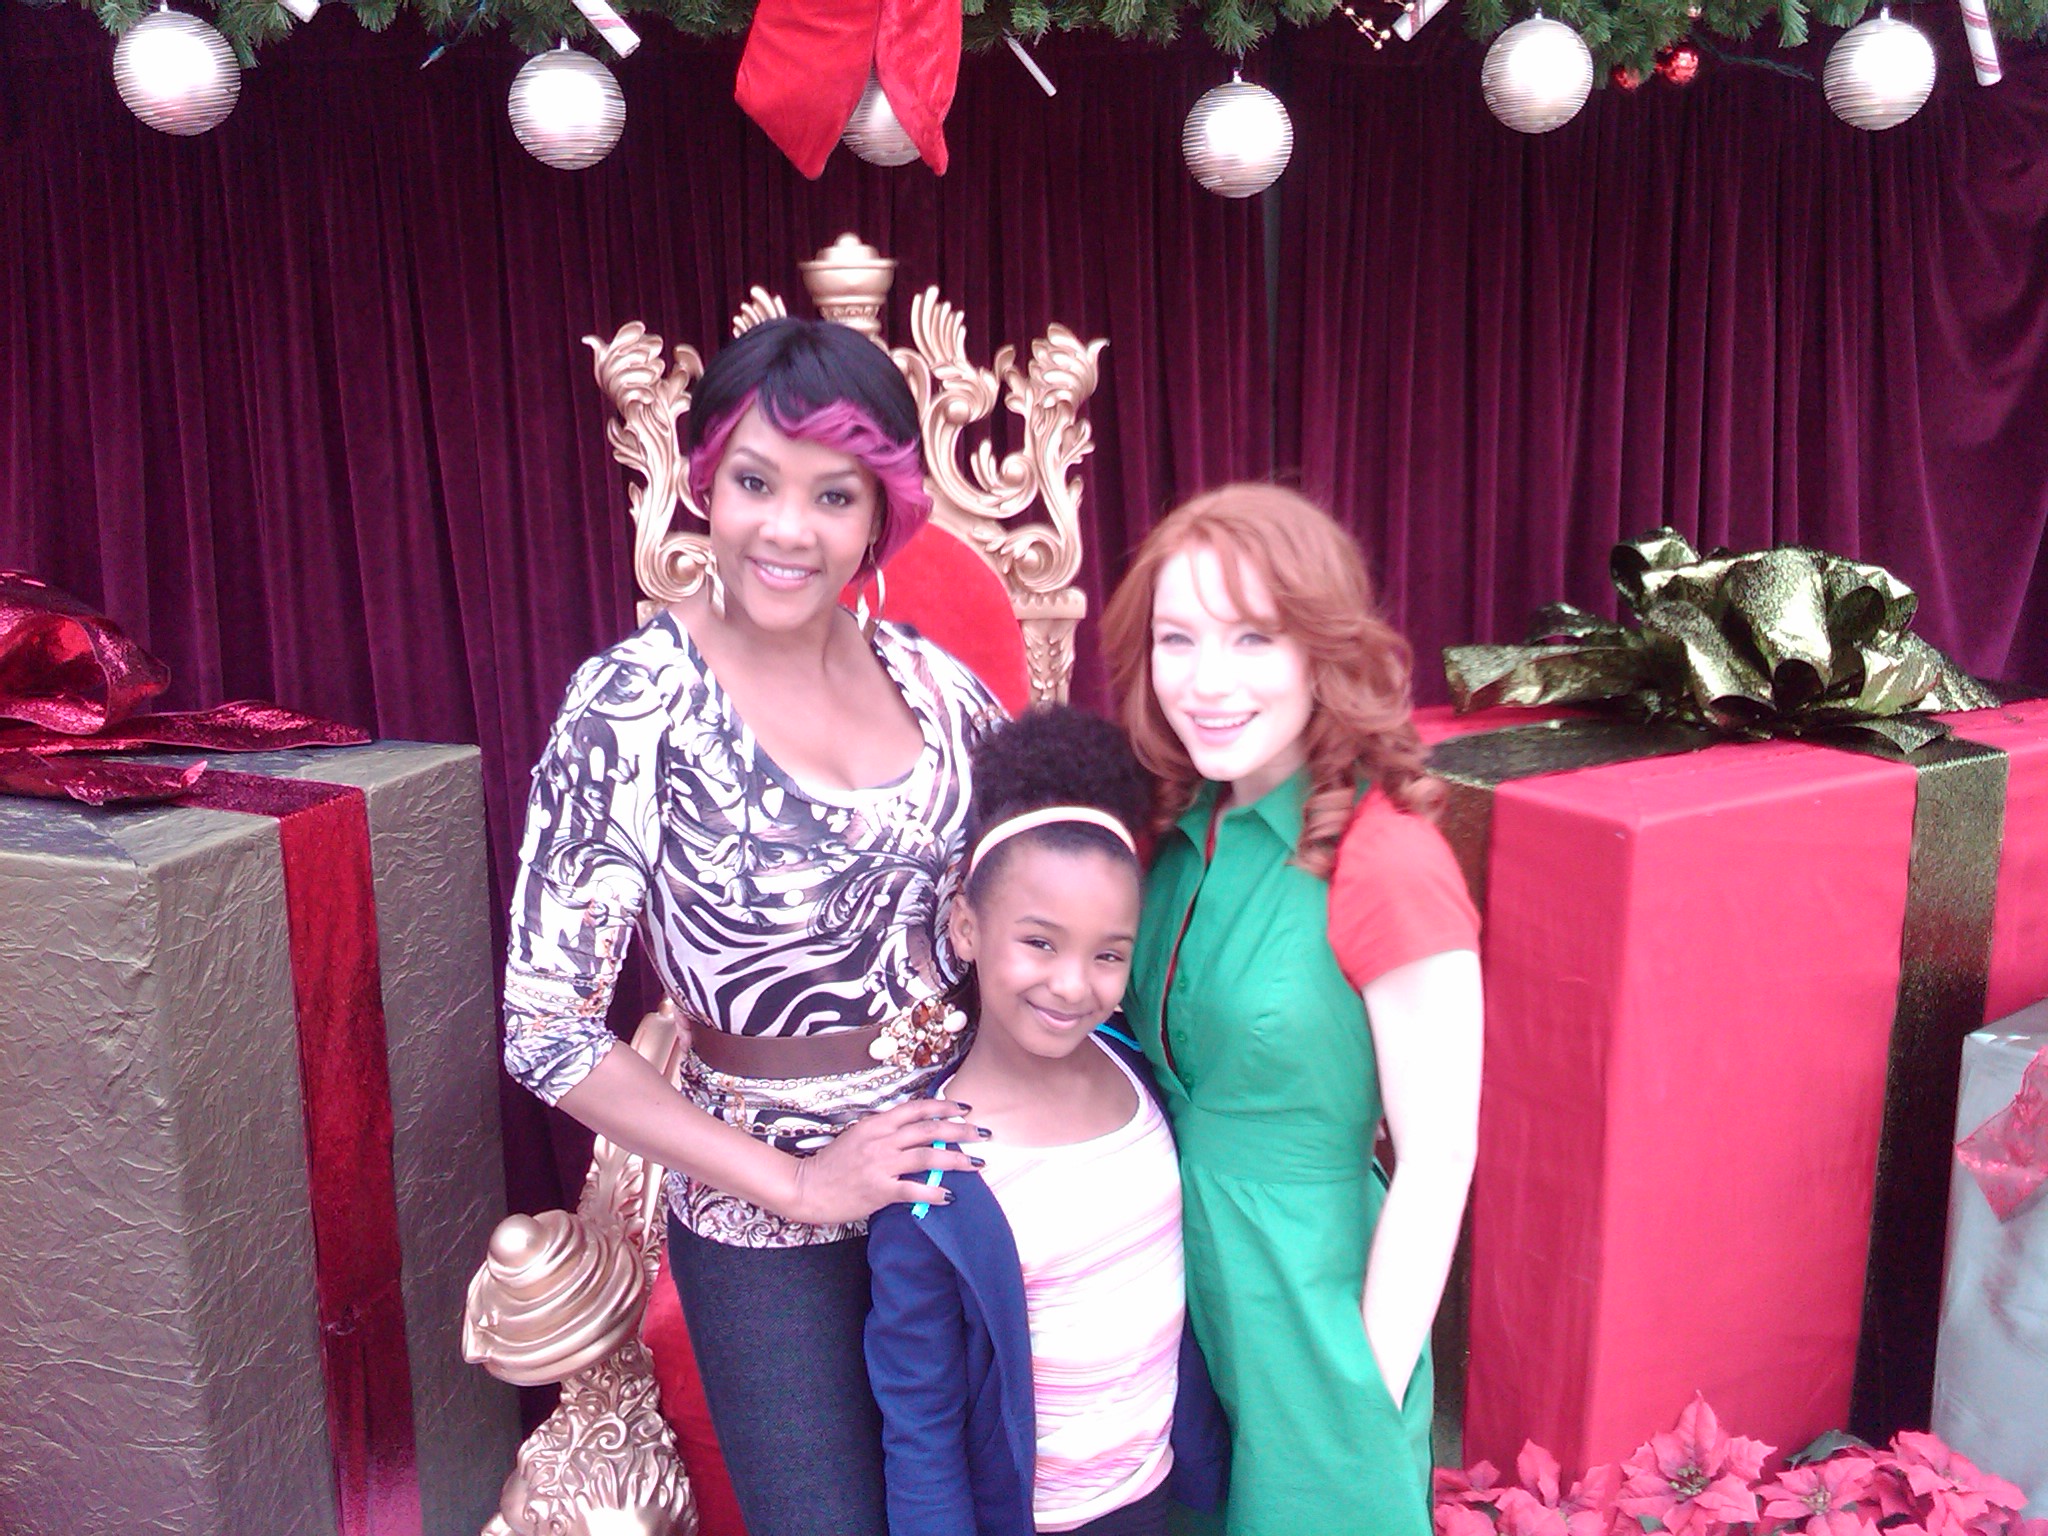 Vivica A fox,Maria Thayer and Nay Nay Kirby on set of Annie Claus